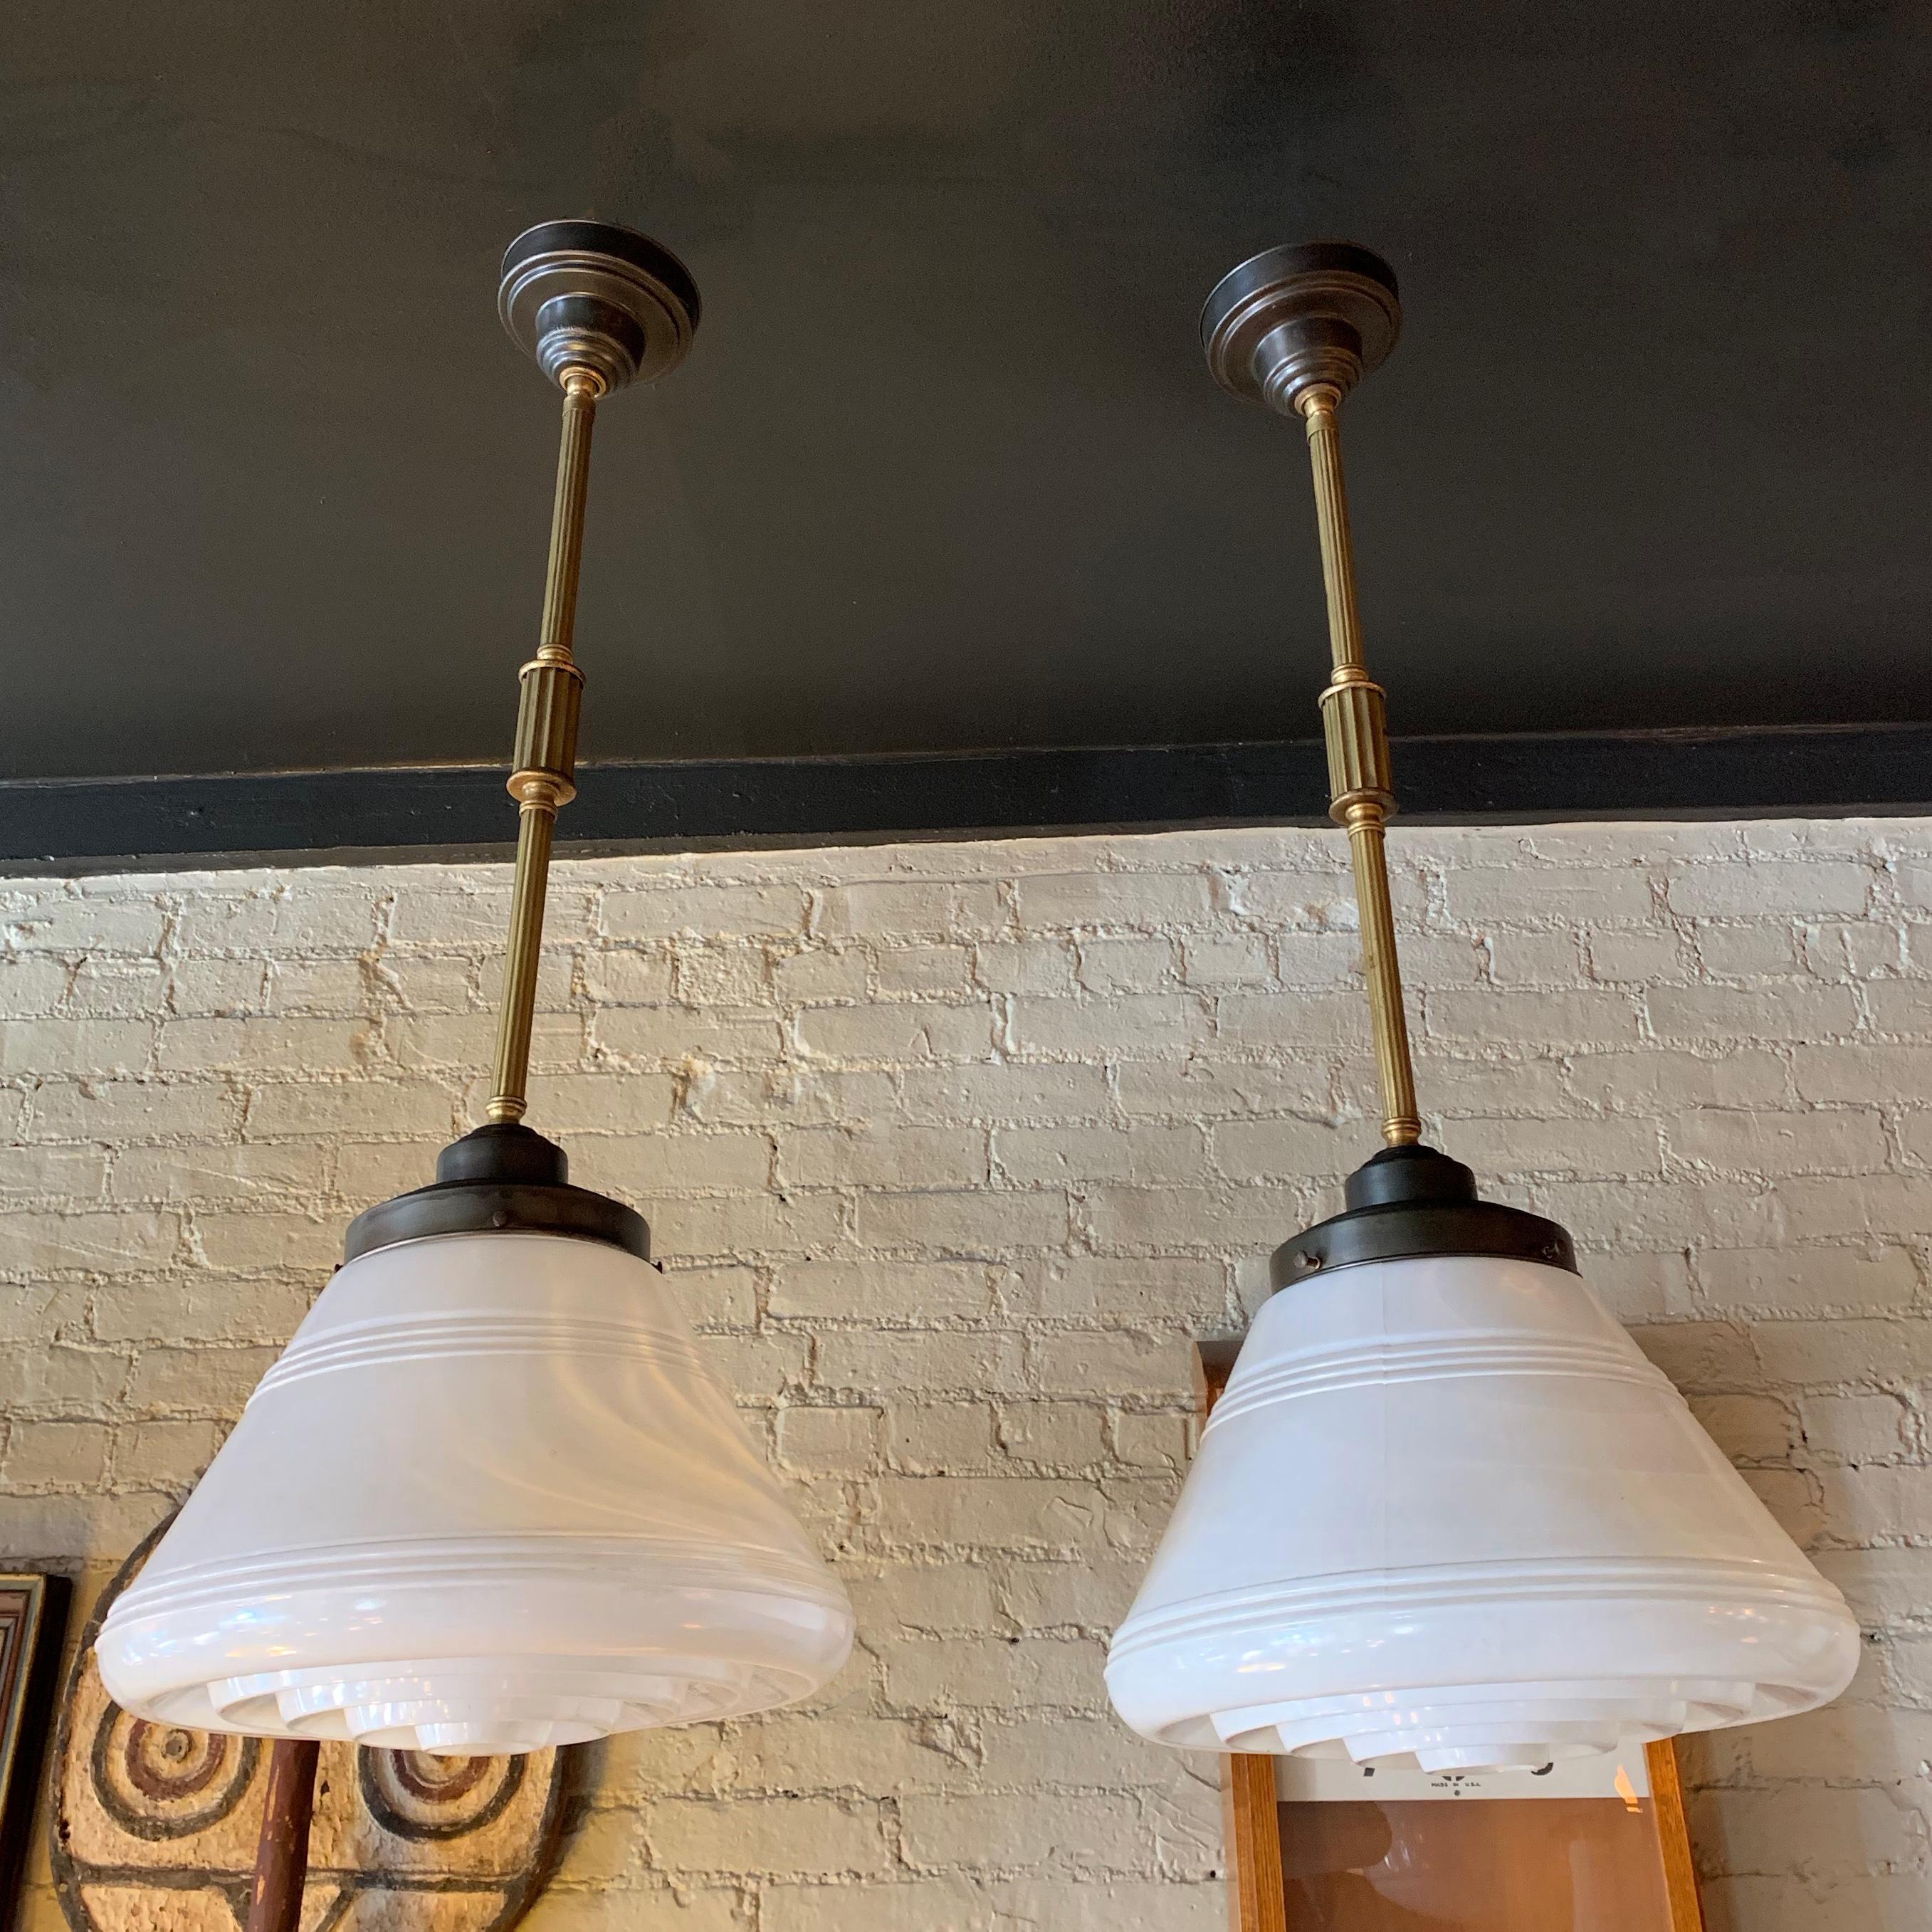 Early 20th century, industrial, art deco, pharmacy pendant light features a milk glass cone shade with clear ridged bottom attached to a two-tone brass stem with ceiling canopy that hangs 35 inches long. The pendant is newly wired to accept up to a